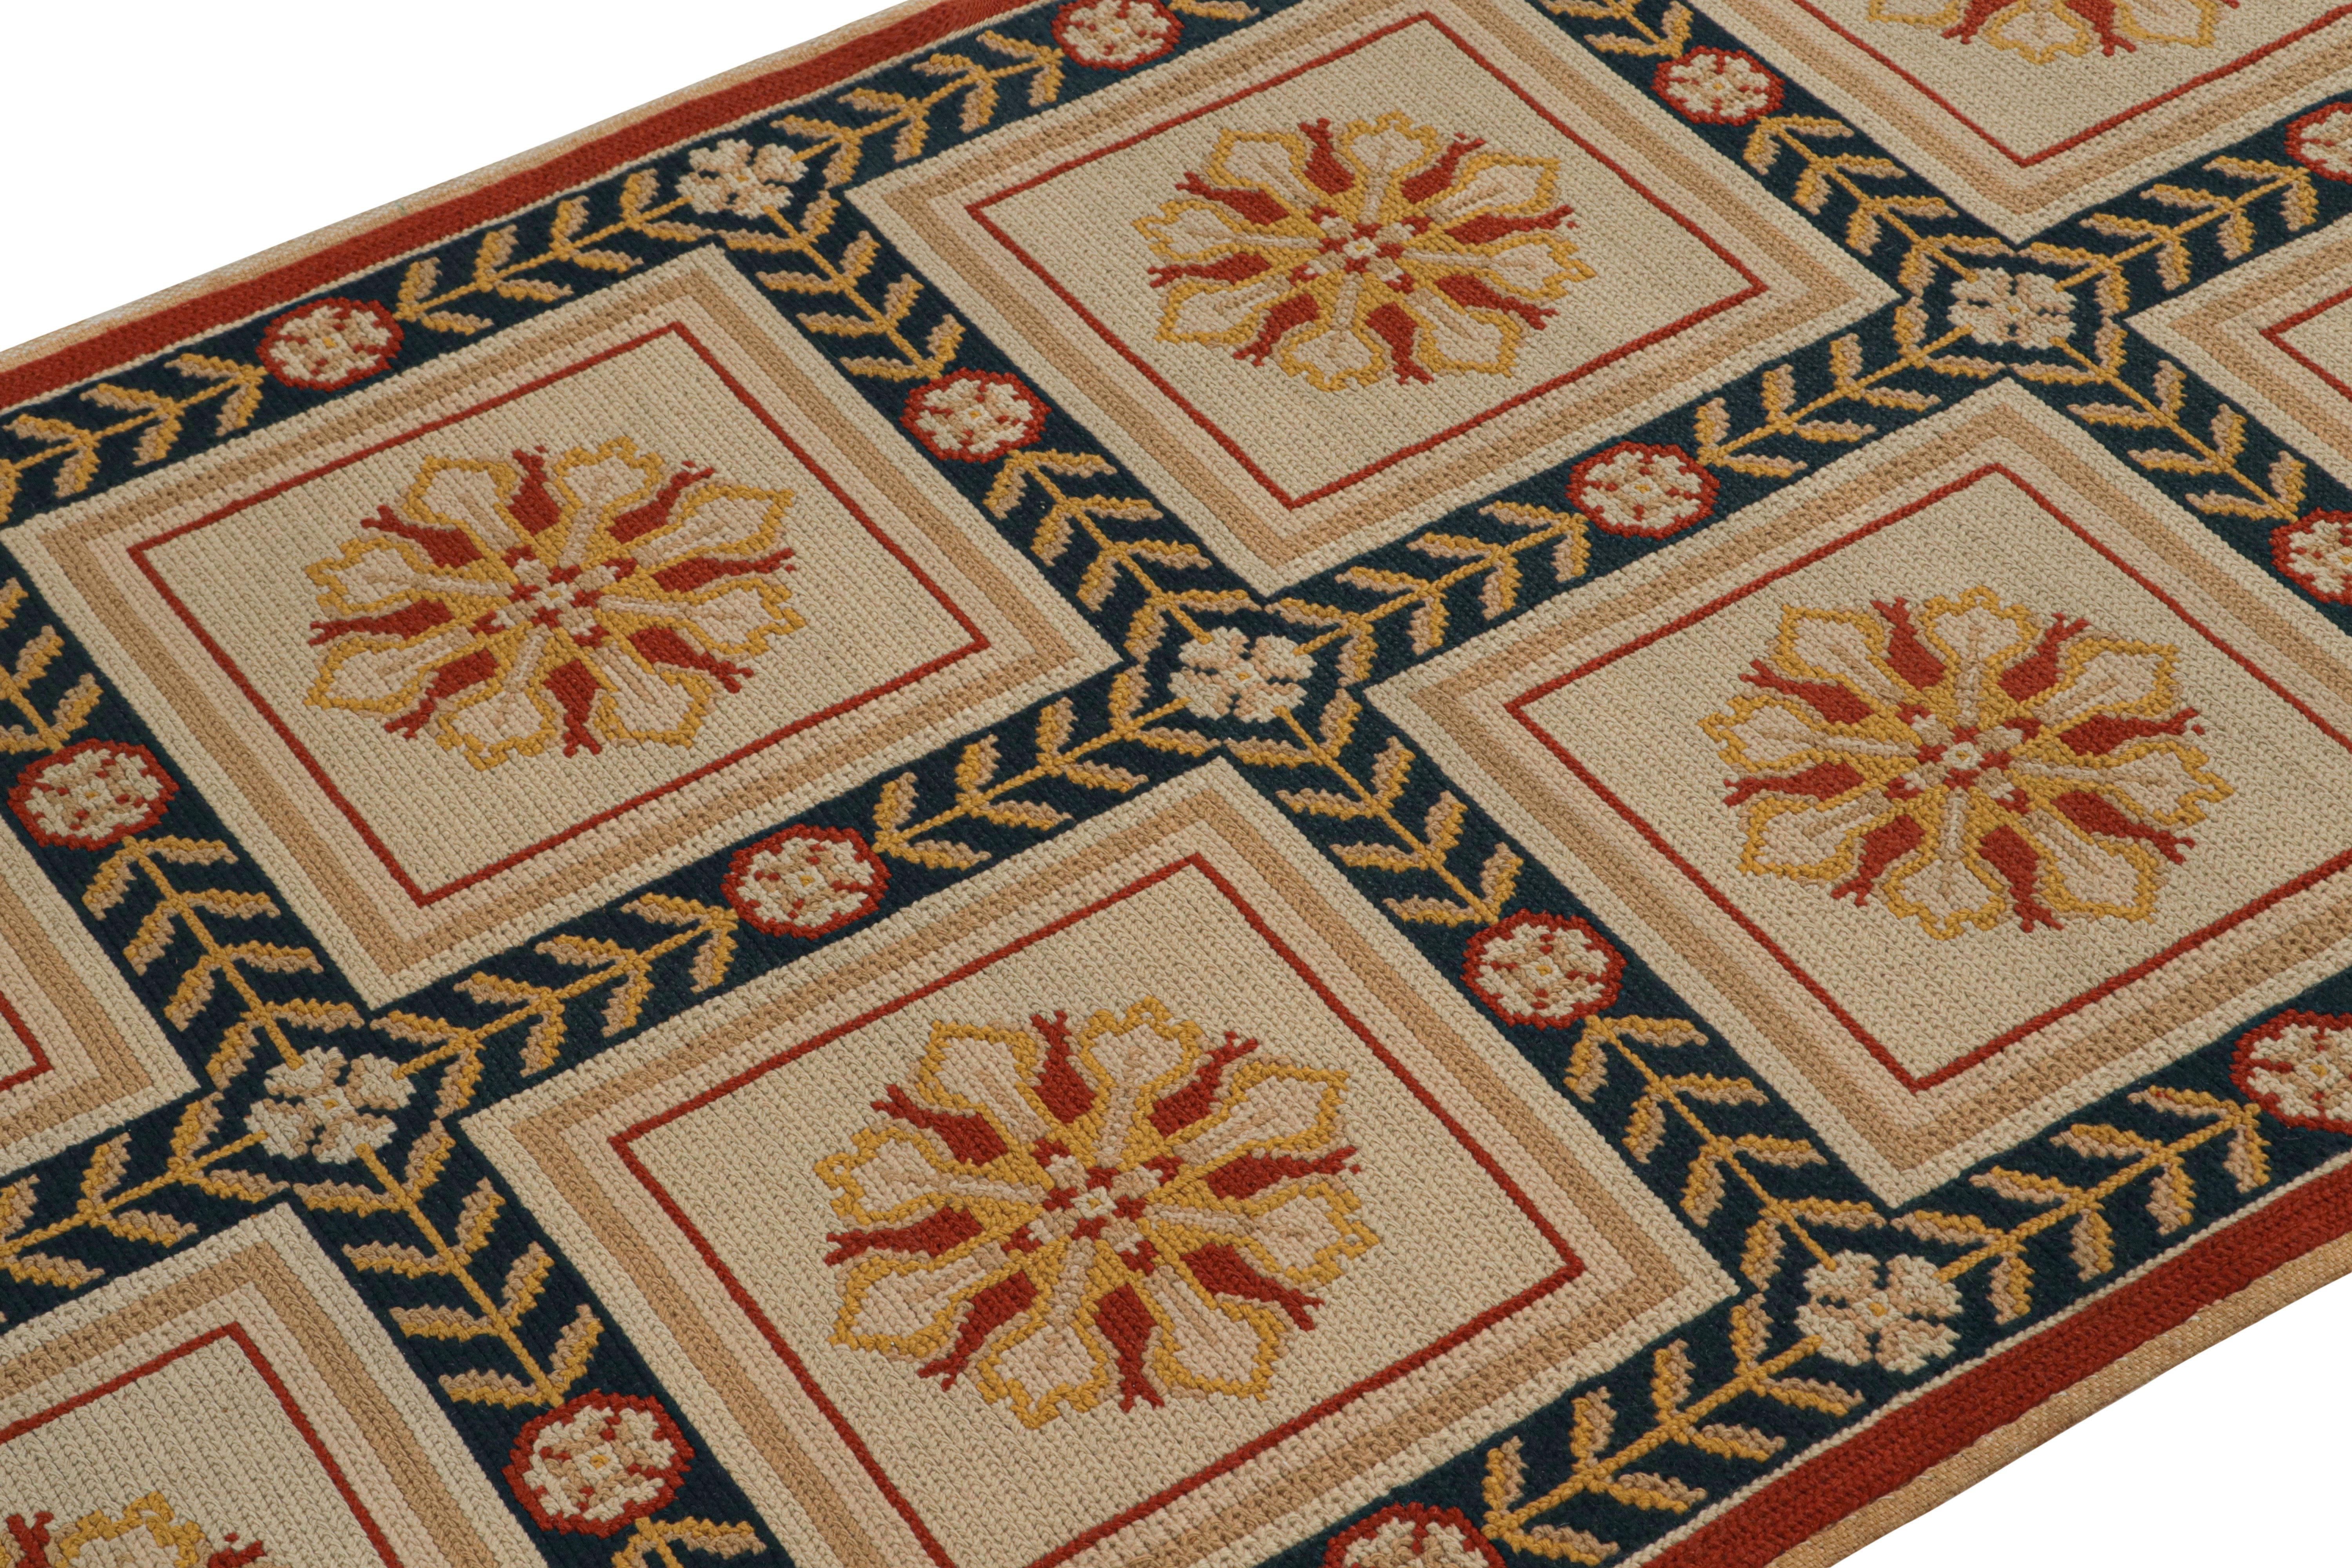 Hand-Knotted Vintage Arraiolos Needlepoint runners in Beige, Red and Gold Floral Medallions For Sale